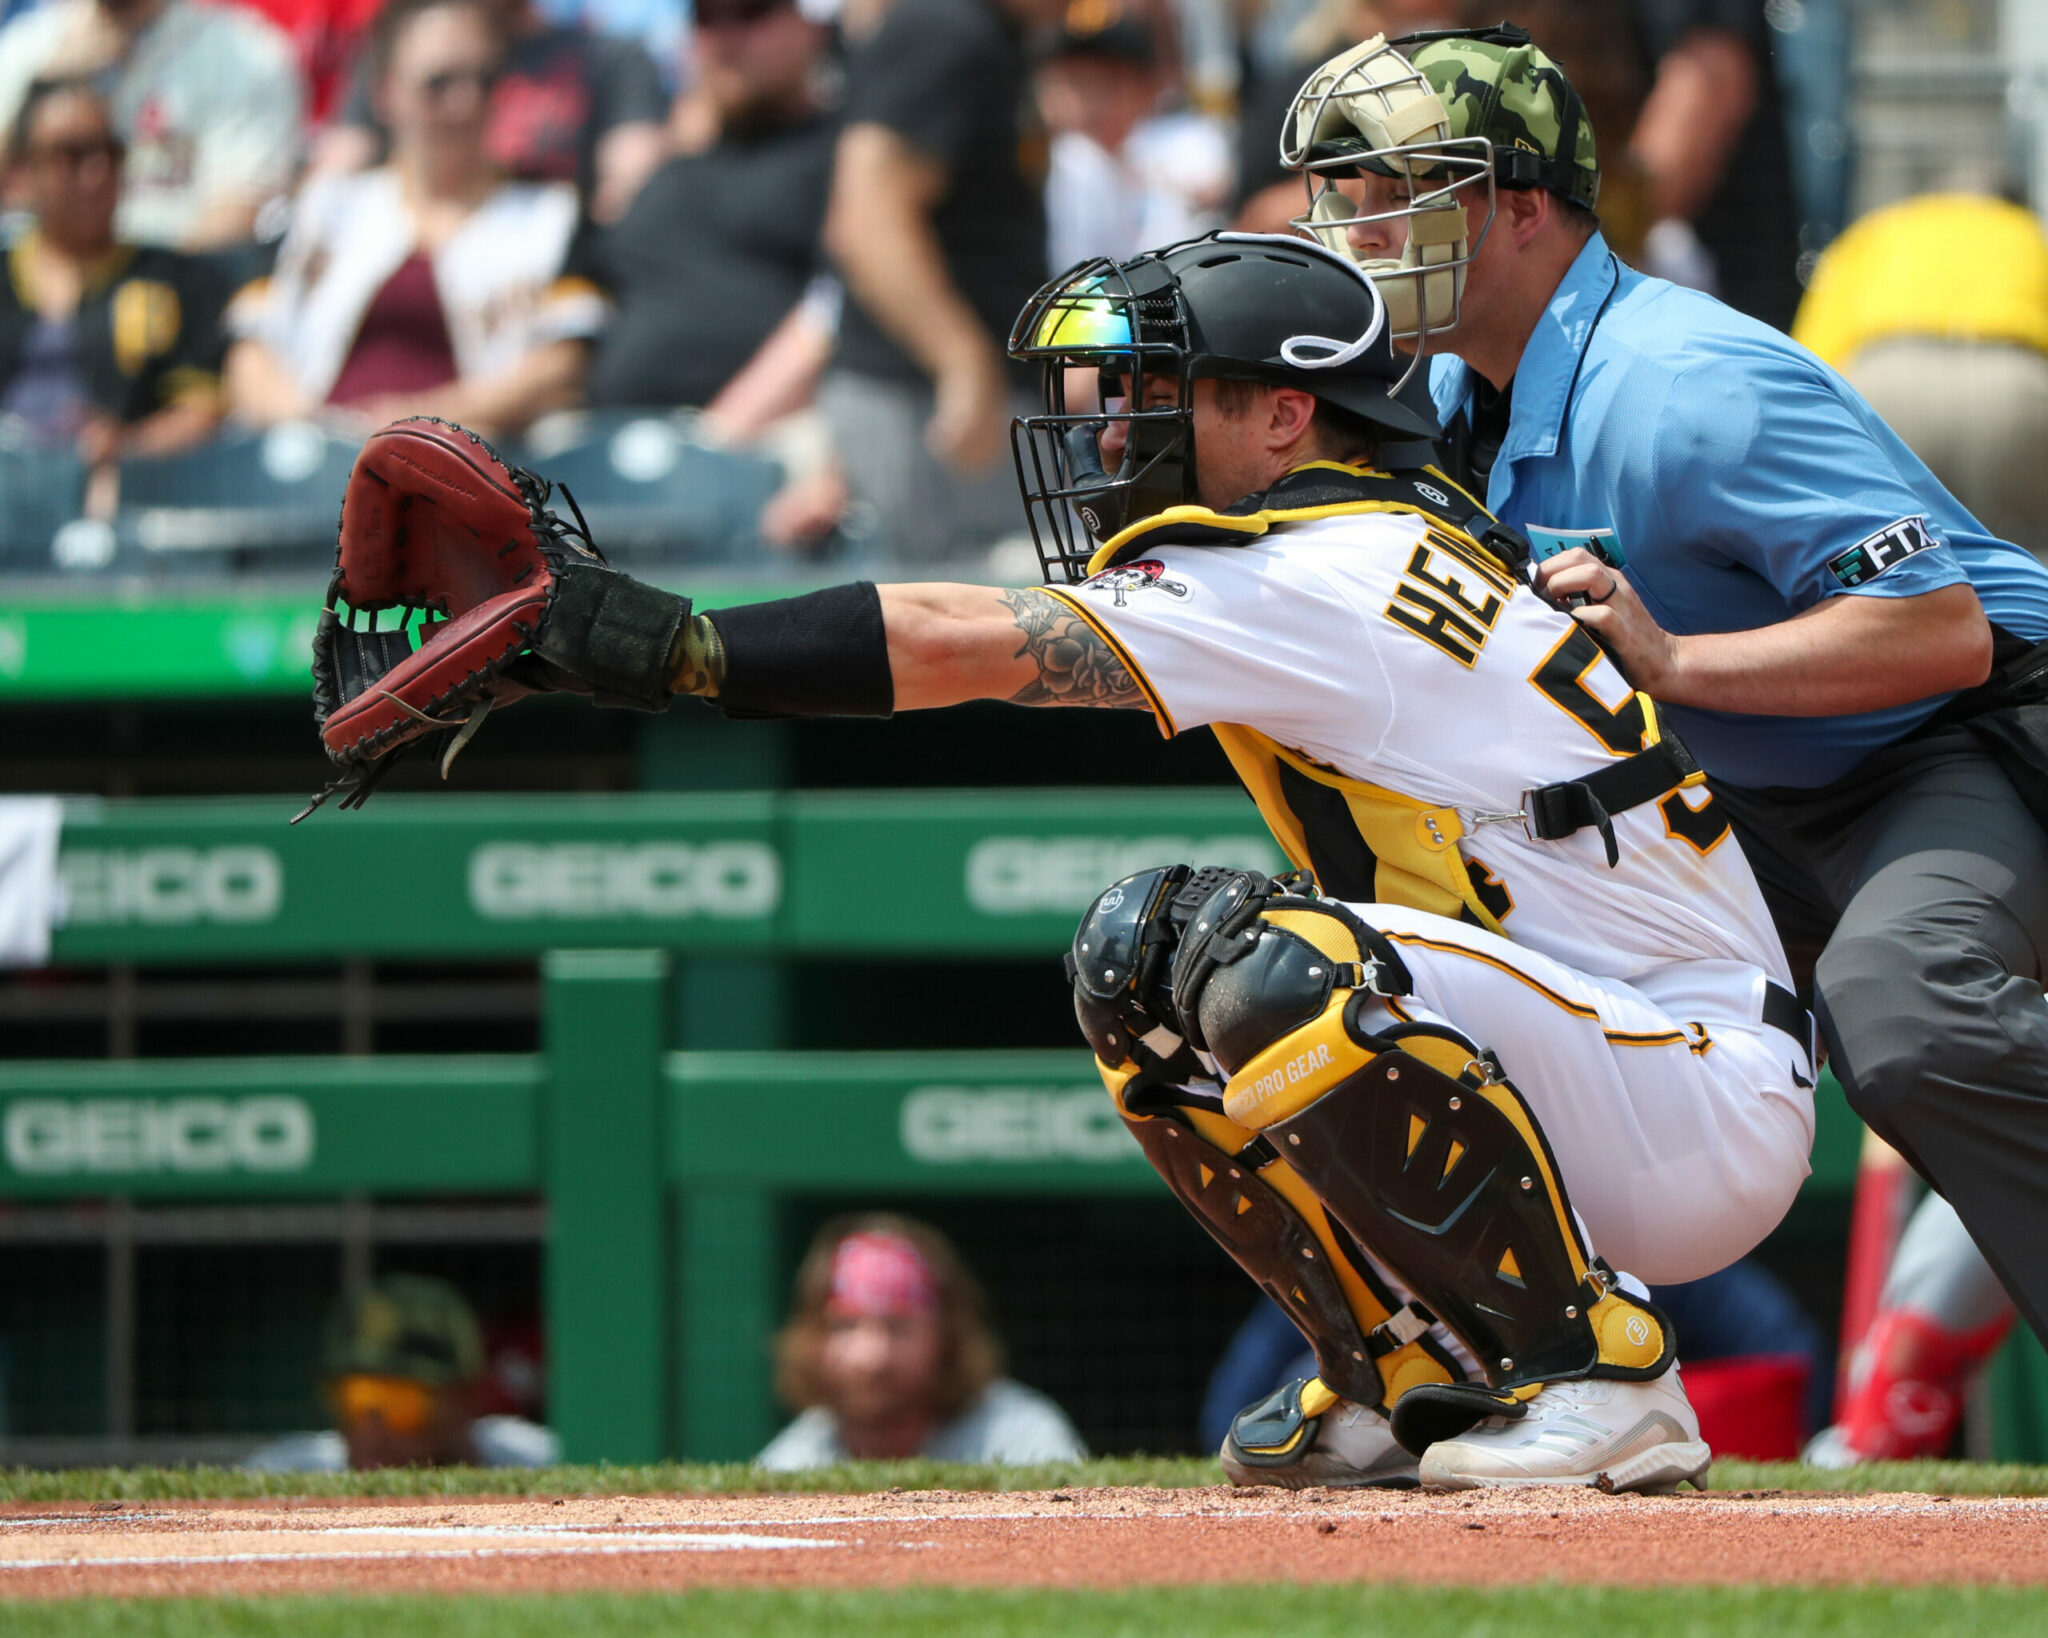 Pirates Prospects Daily: The Backup Catcher Battle Just Got More Interesting